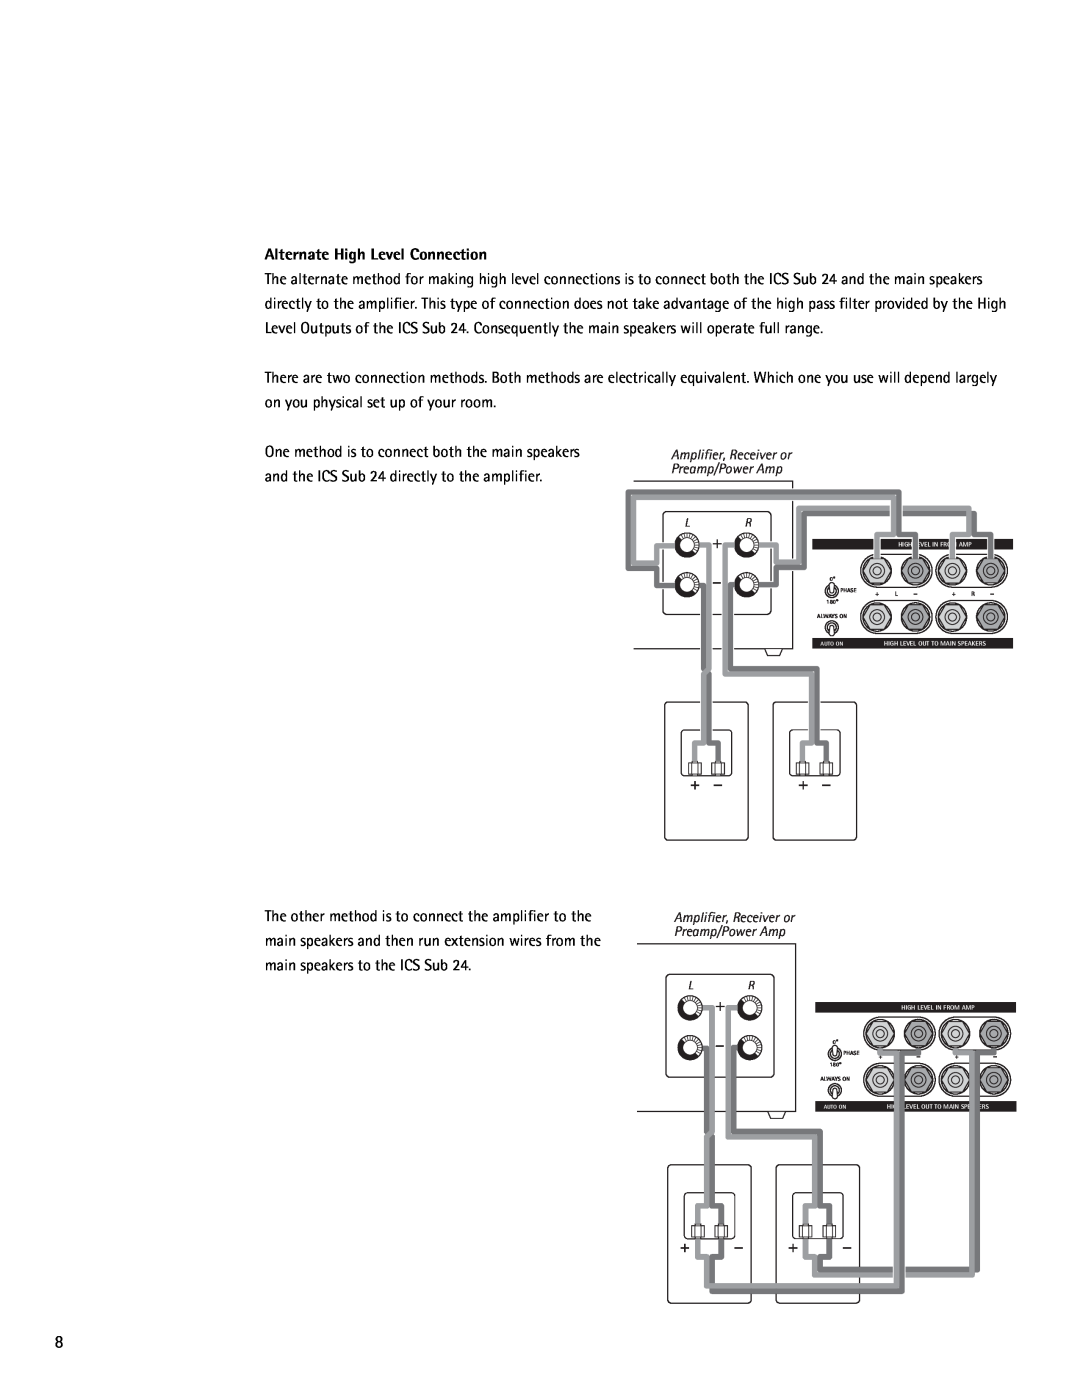 Snell Acoustics ICS Sub 24 owner manual Alternate High Level Connection, Amplifier, Receiver or, Preamp/Power Amp 